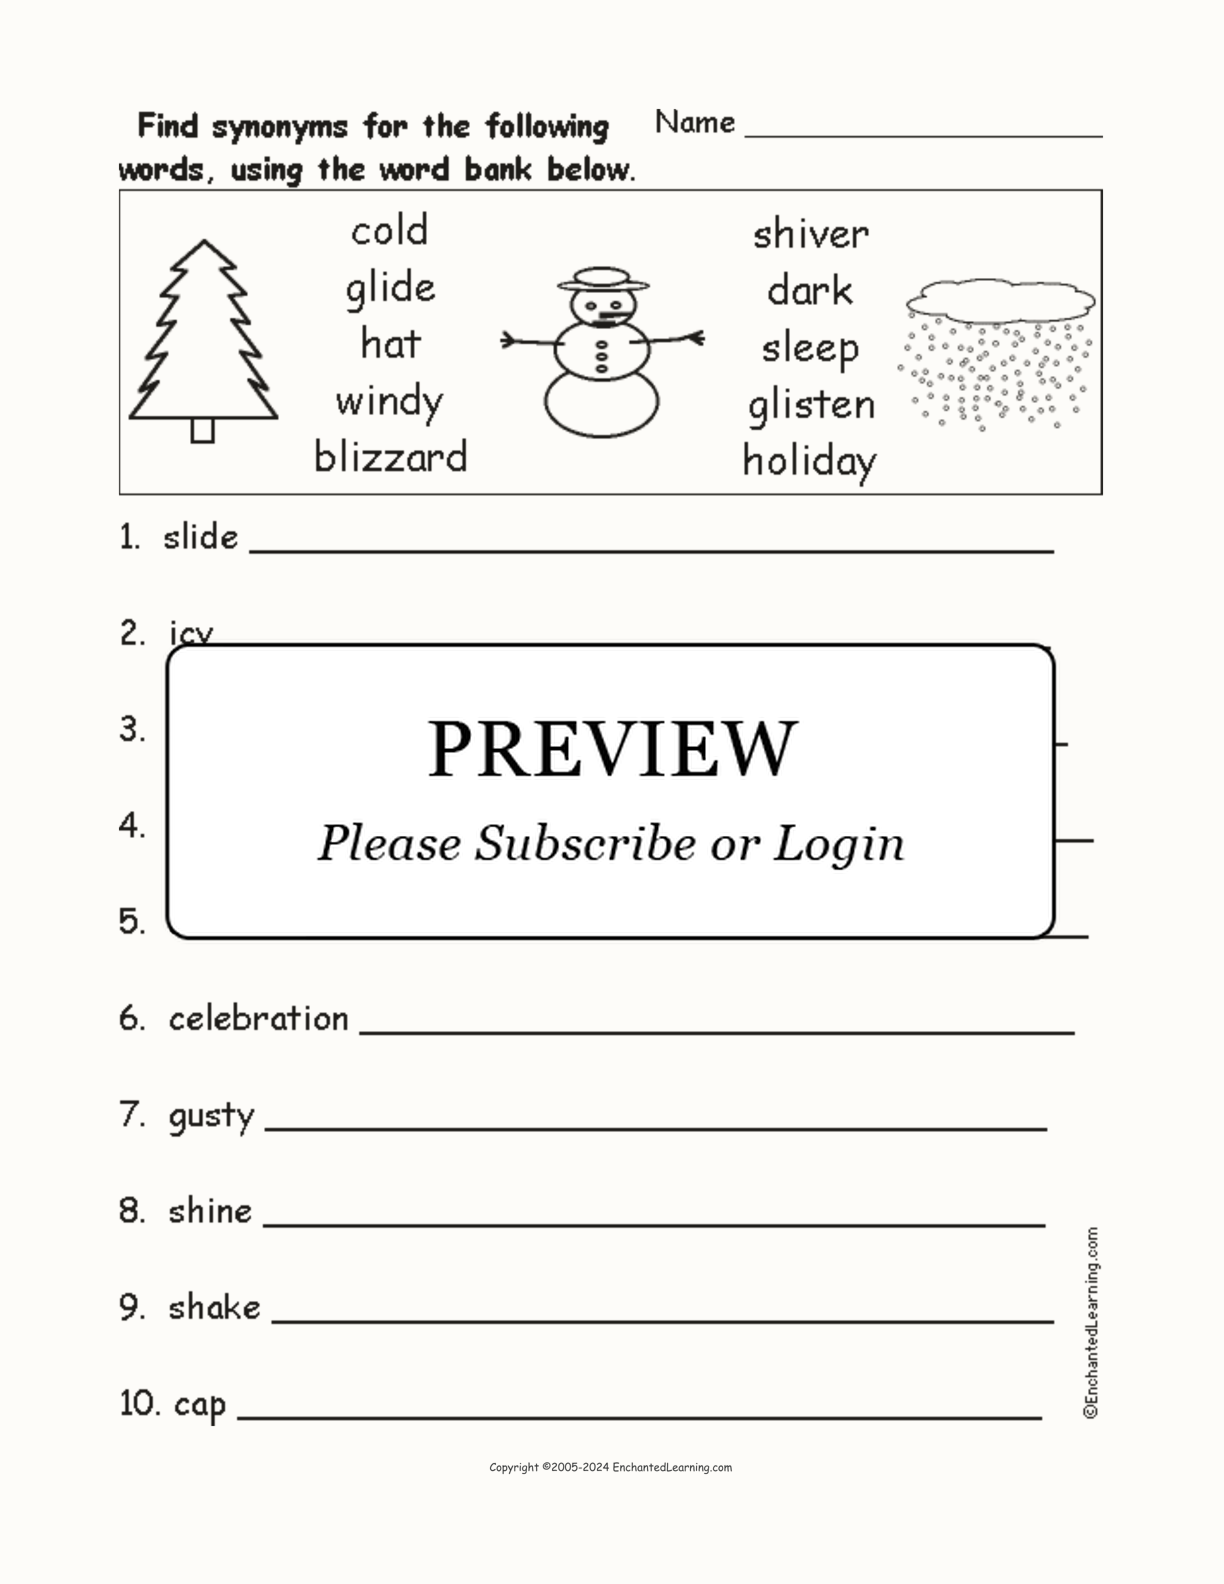 Winter Synonyms interactive worksheet page 1